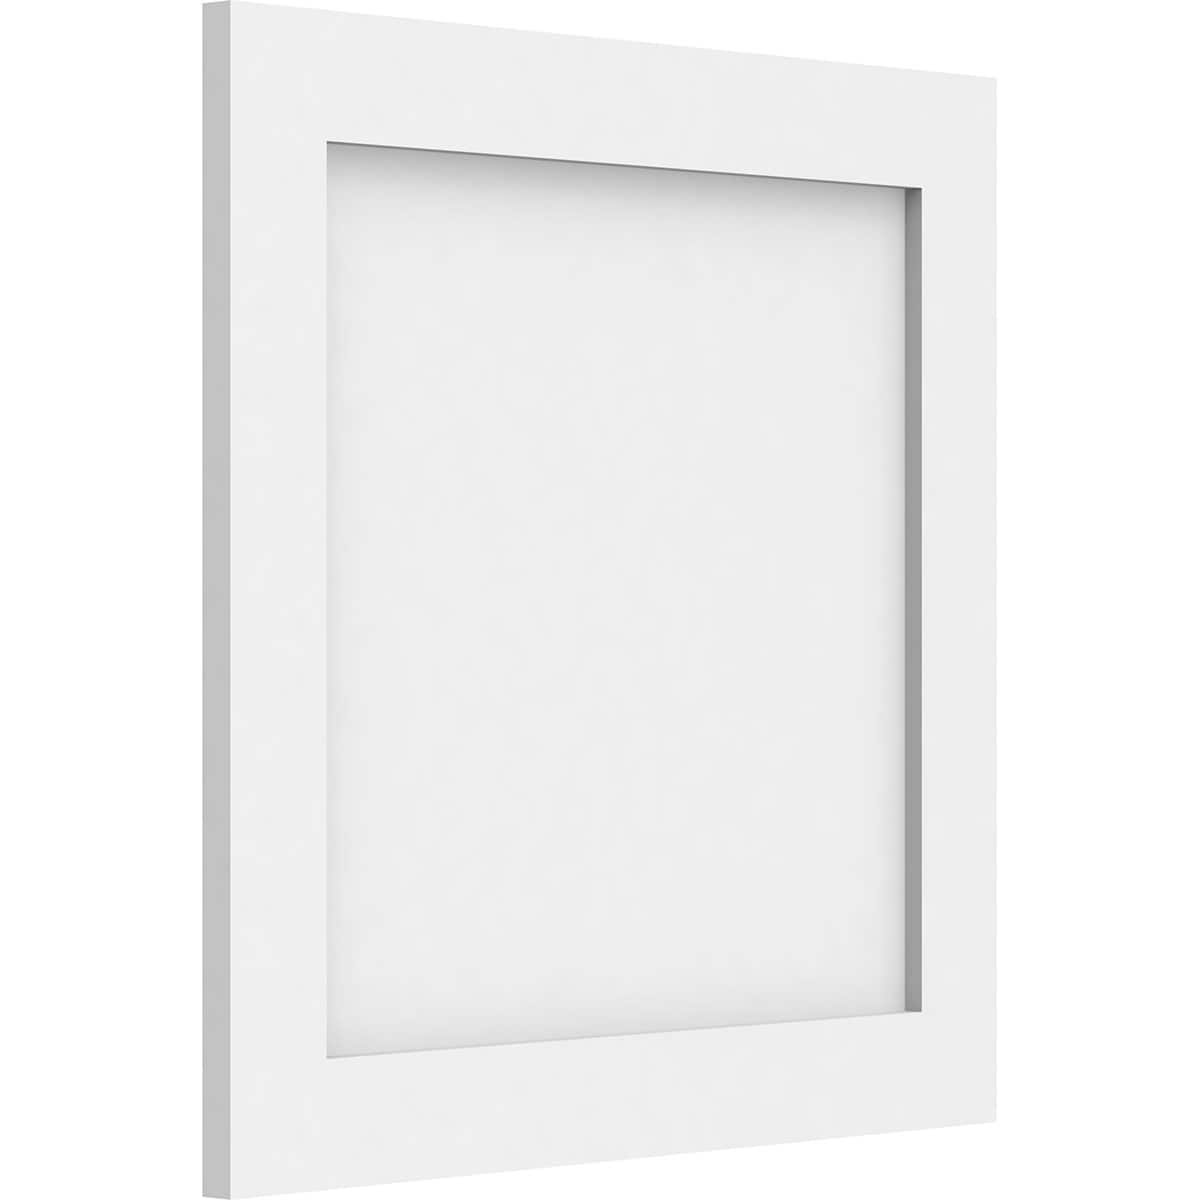 Ekena Millwork 18-in x 18-in Smooth White PVC Fretwork Wall Panel in ...